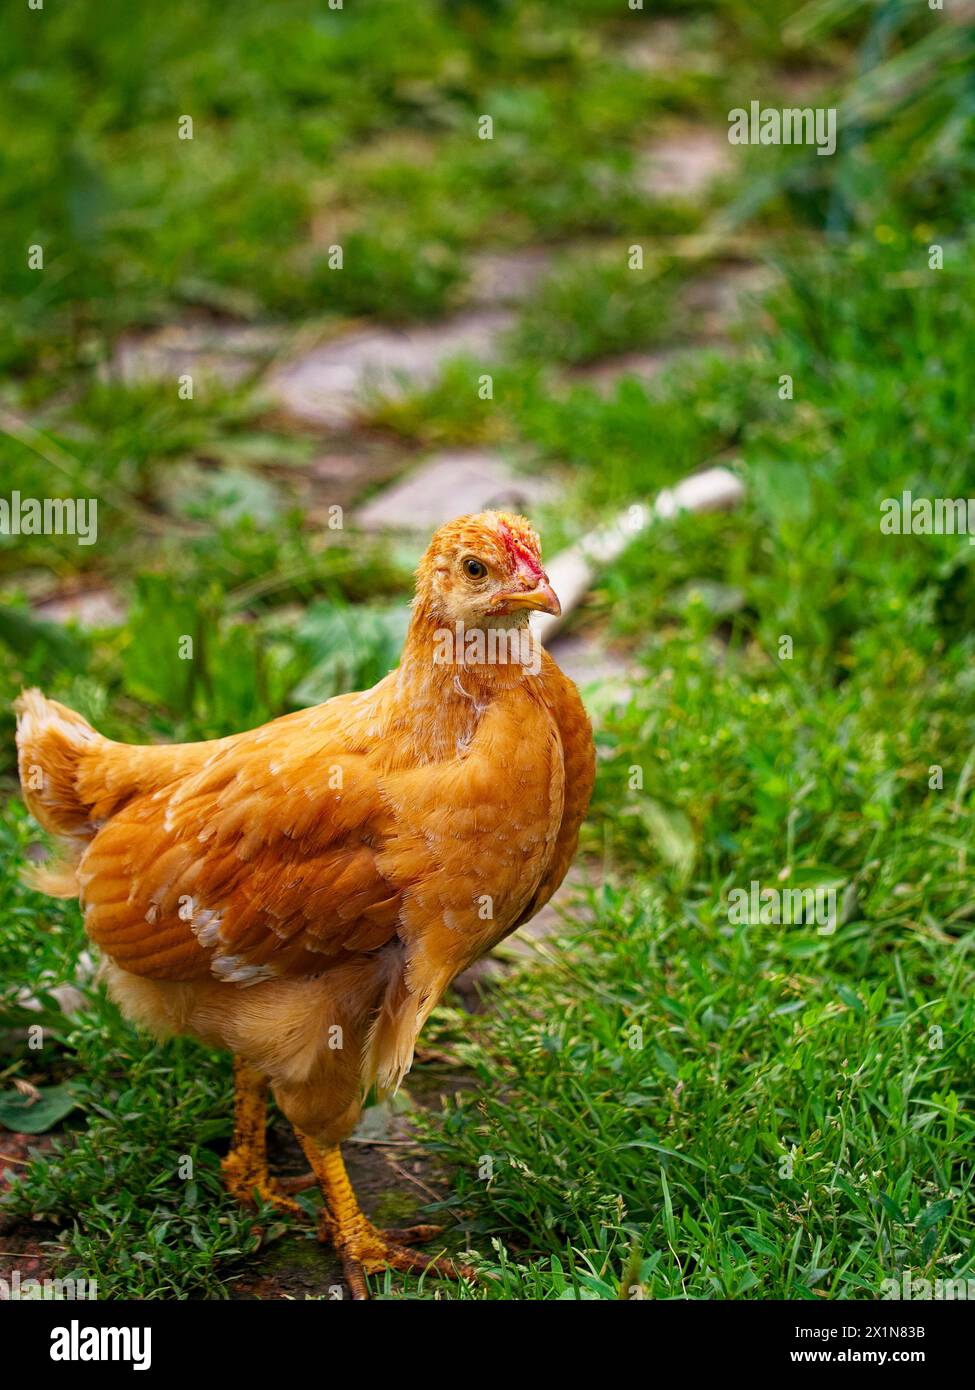 A crisp photo of a brown chicken navigating through dense green grass, exuding calmness and the raw beauty of nature. Stock Photo